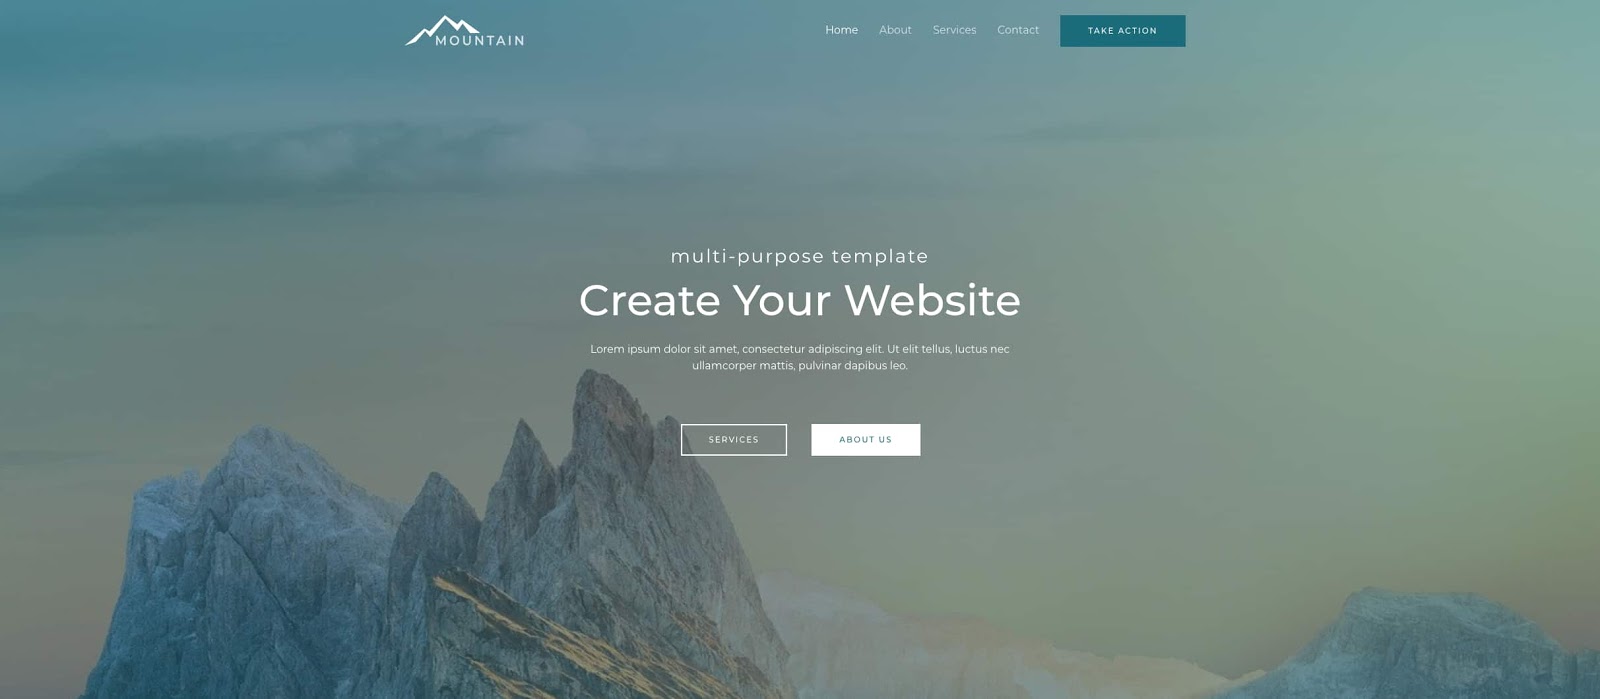 38 Best WordPress Tech Themes for Bloggers and Businesses